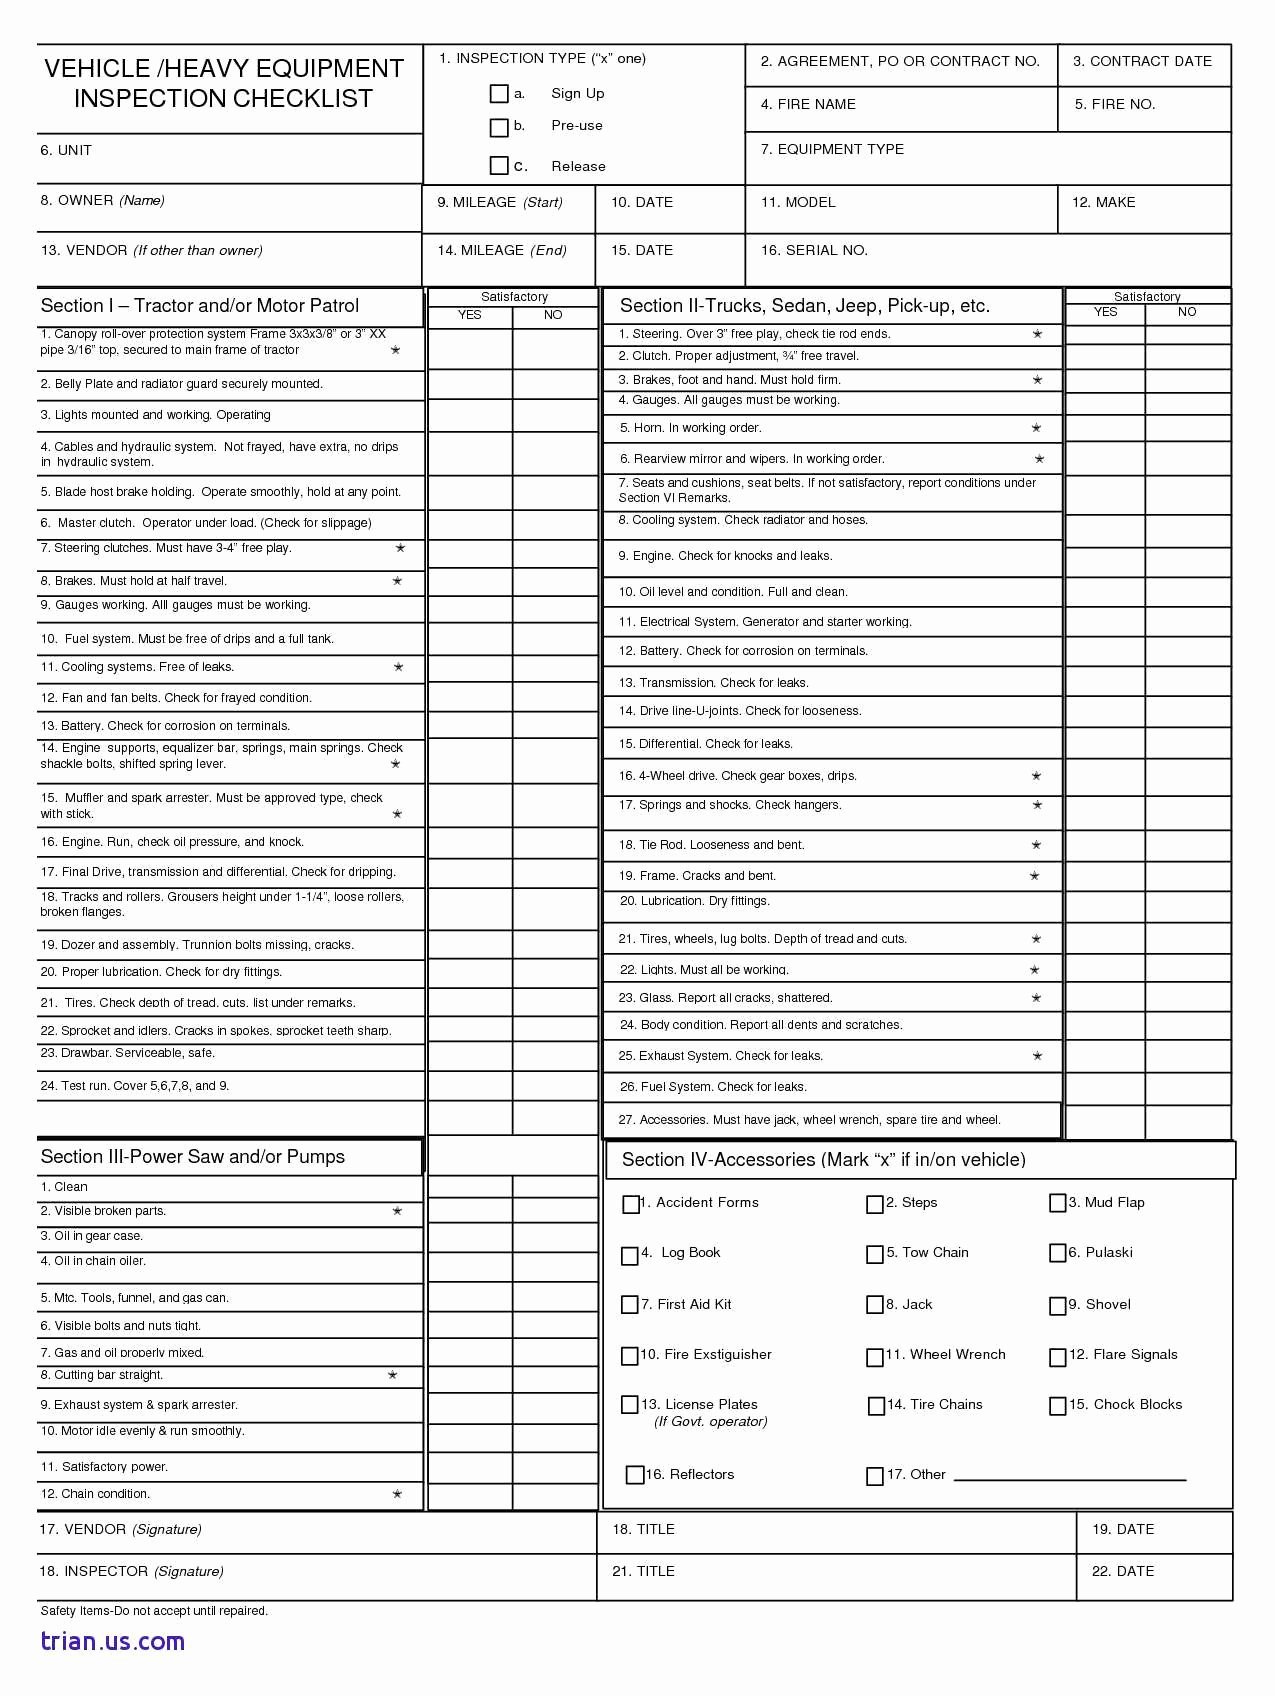 Daily Truck Inspection Report Template Inspirational